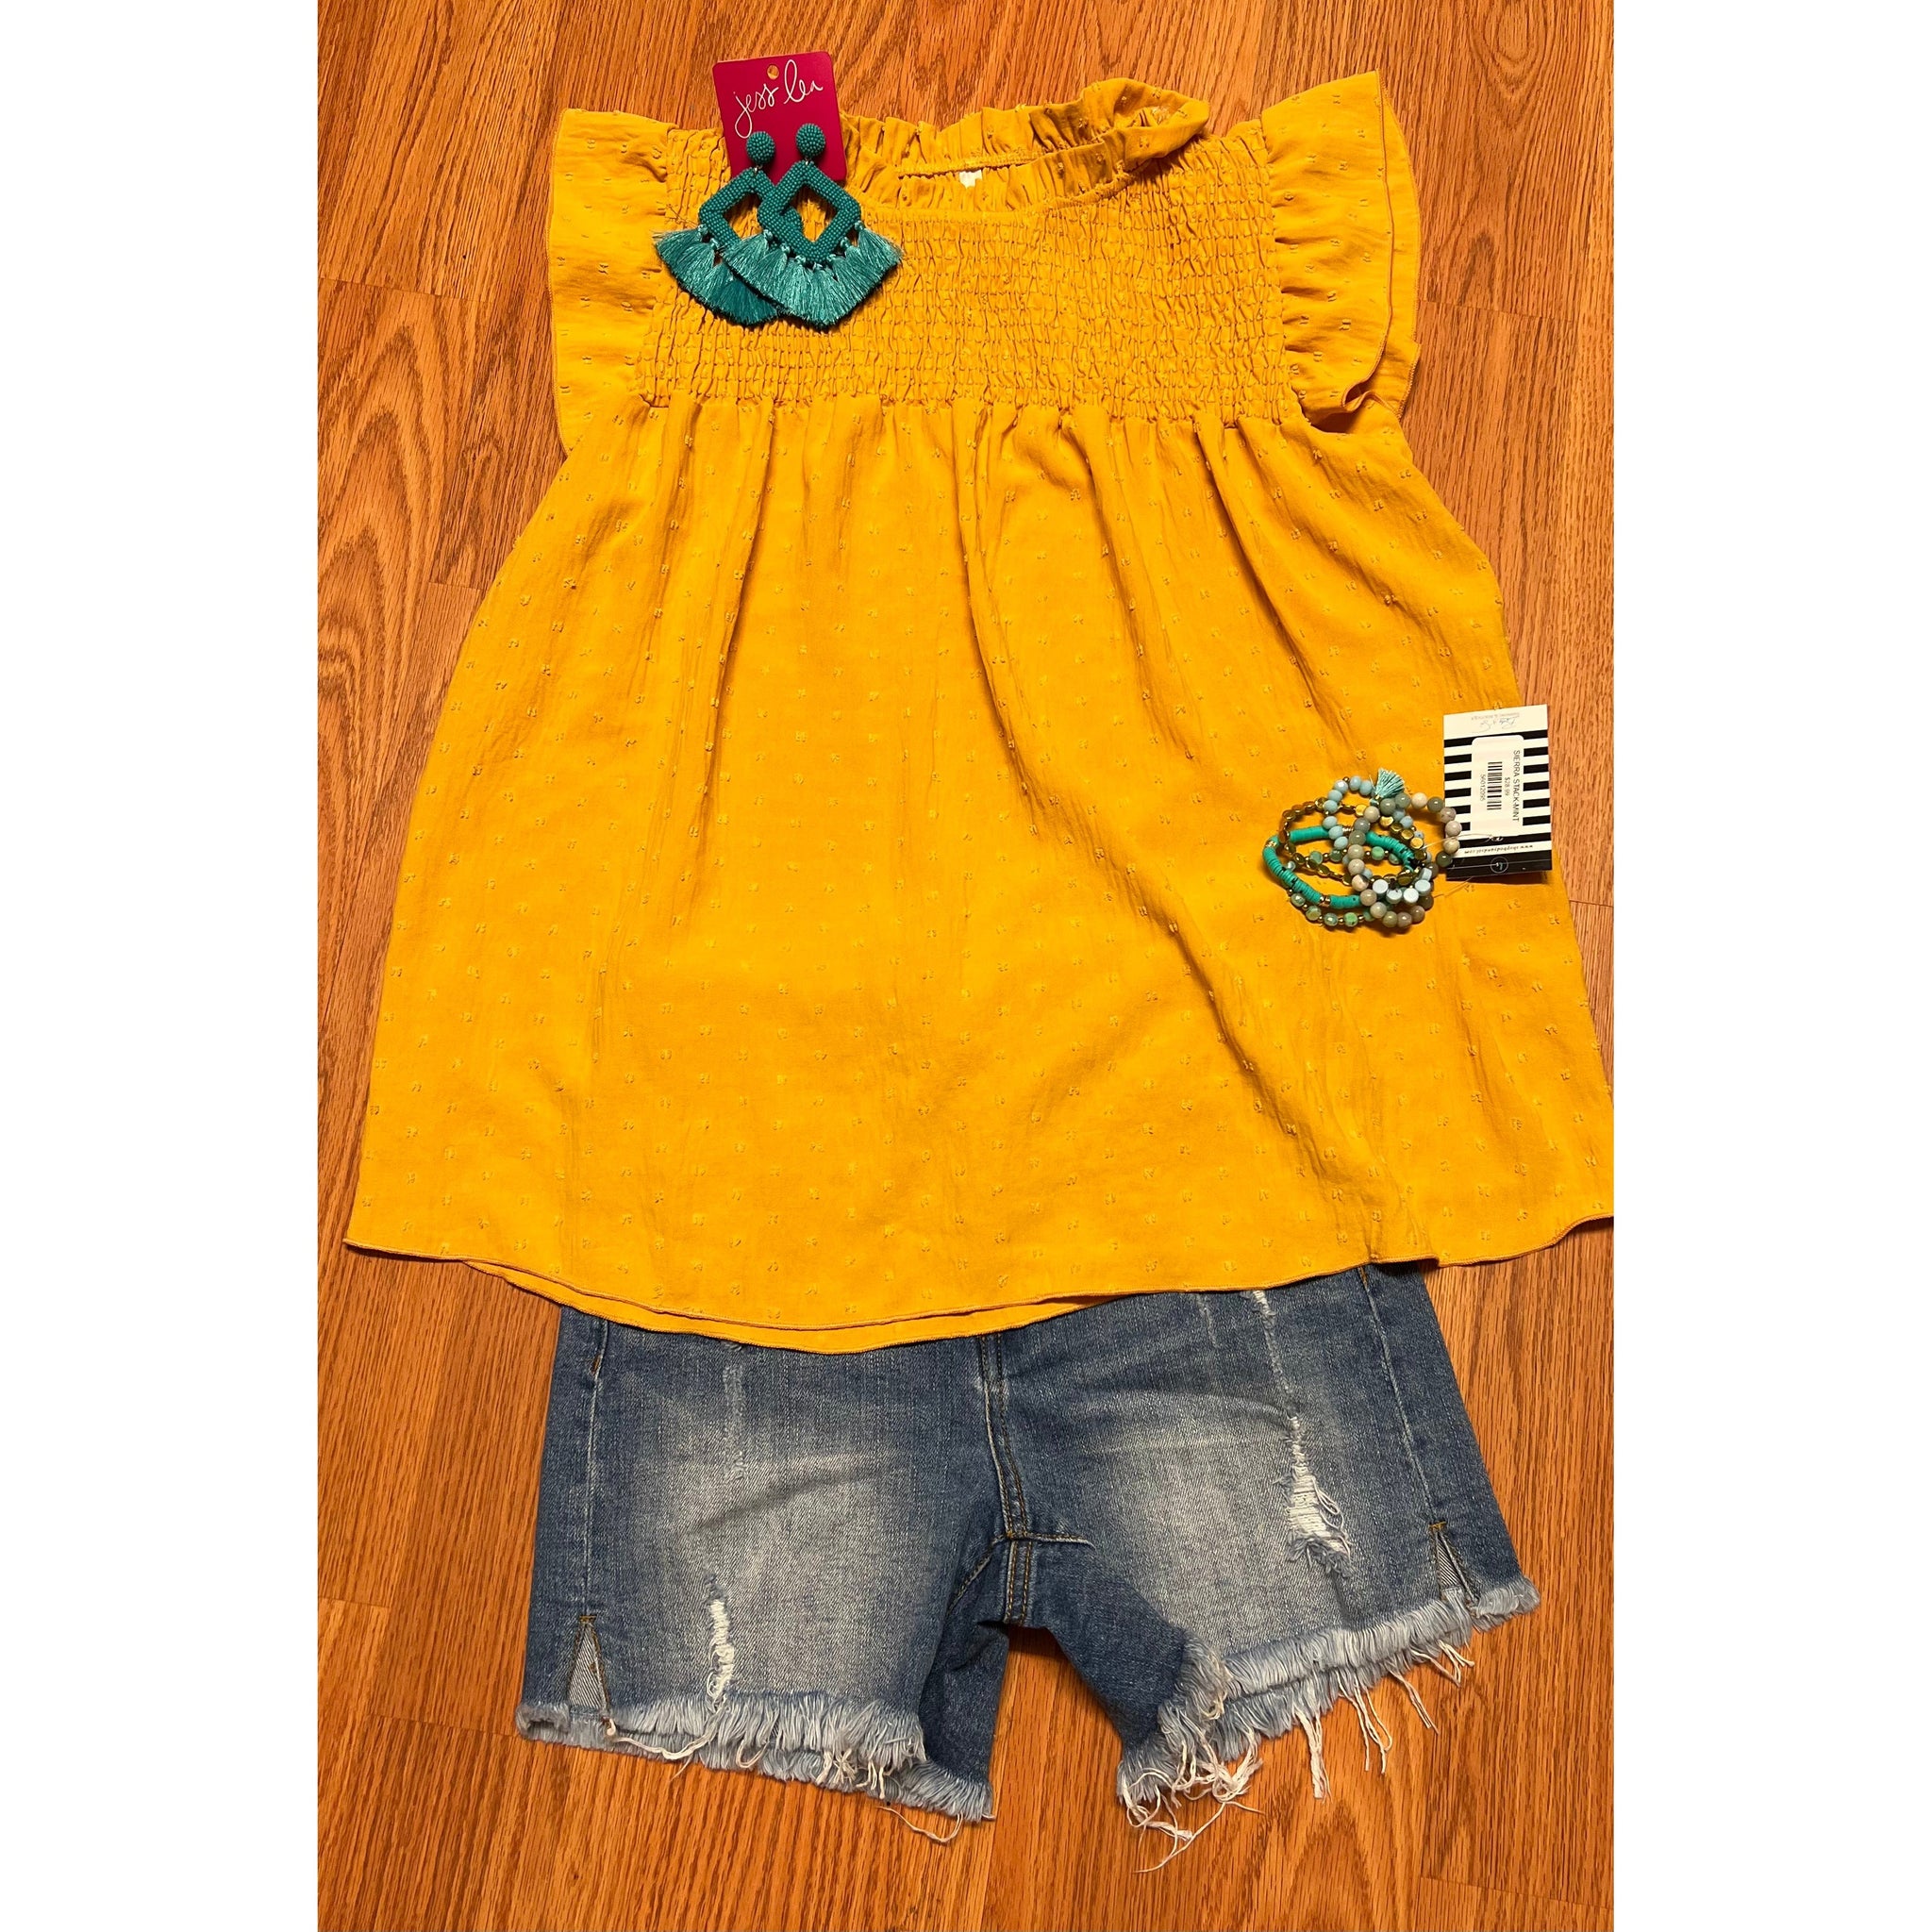 STACIE TOP IN MUSTARD-Body and Sol